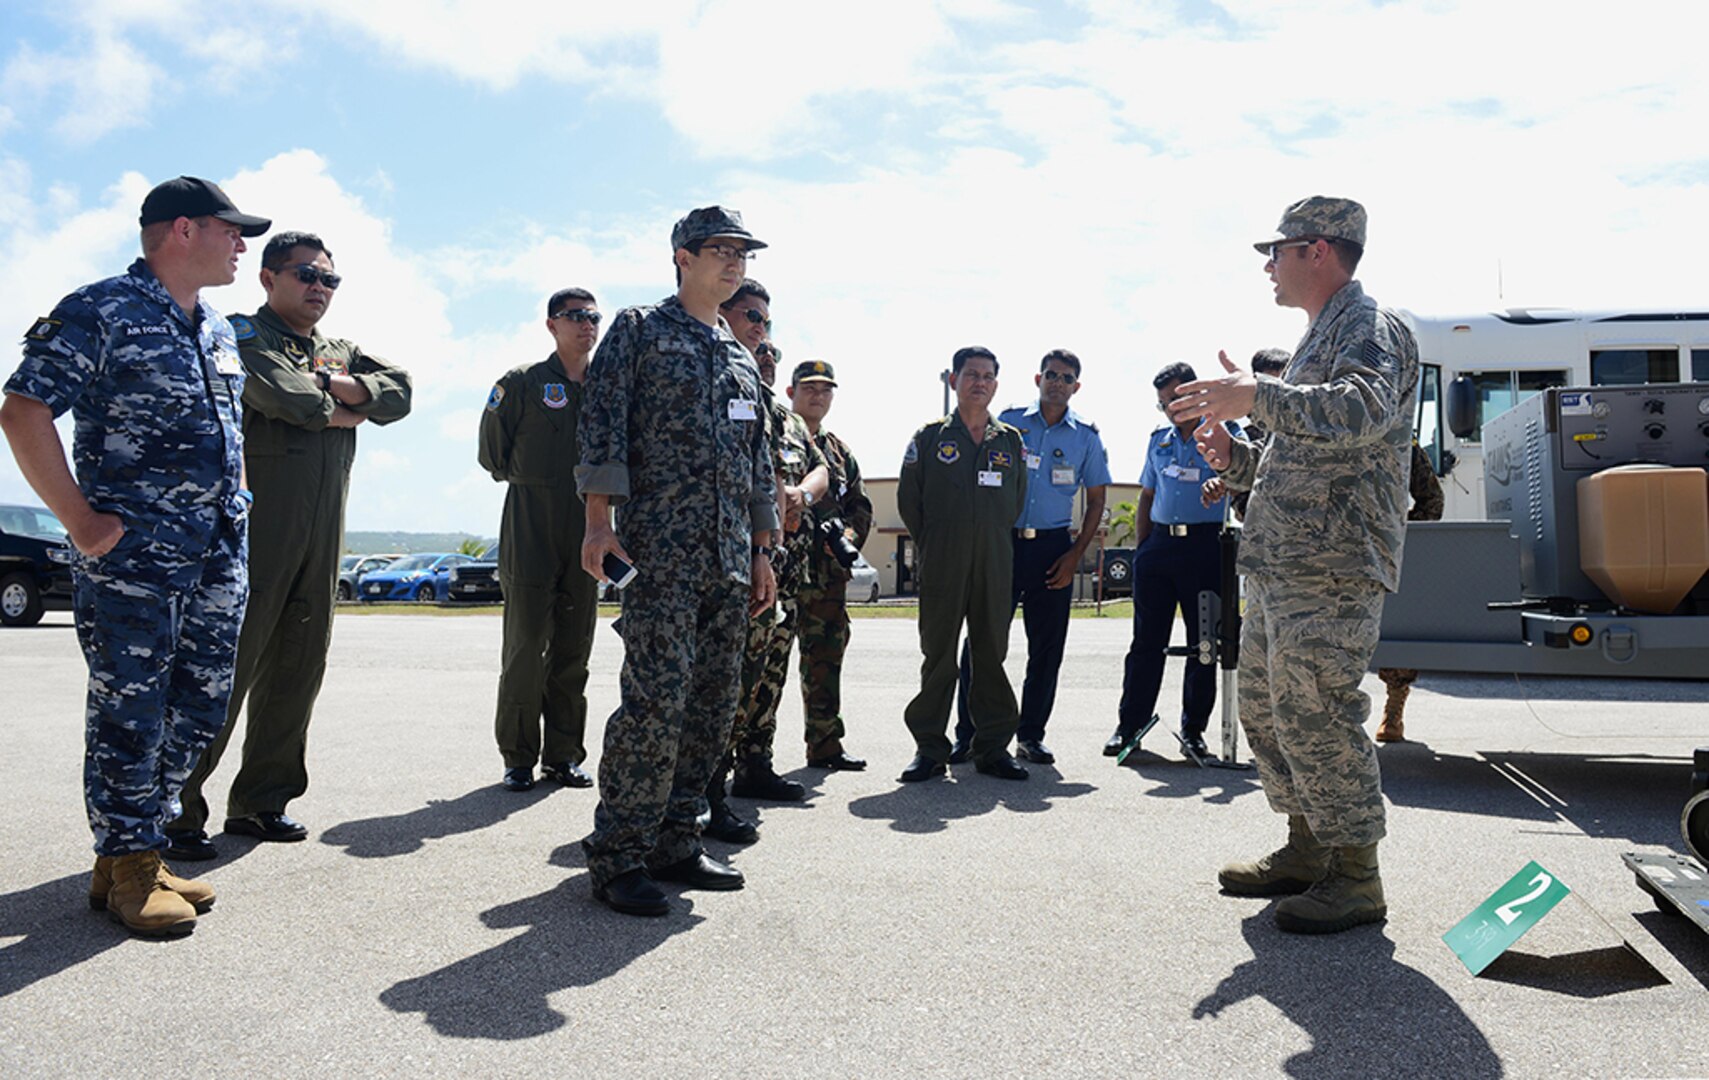 Military logistics and maintenance experts from nine nations discuss the procedures to build a cargo pallet during Pacific Agility 16-1 March 15, 2016, at Andersen Air Force Base, Guam. Pacific Agility is a multilateral U.S. Pacific Agility is a Pacific Air Forces-led engagement focusing on a series of logistics subject-matter expert exchanges designed to increase partner capabilities, military relations and regional stability for the Indo-Asia-Pacific region. The four-day program focused on various topics such as logistics, aircraft maintenance, air/ground transportation, humanitarian assistance/disaster relief and contingency operations. 